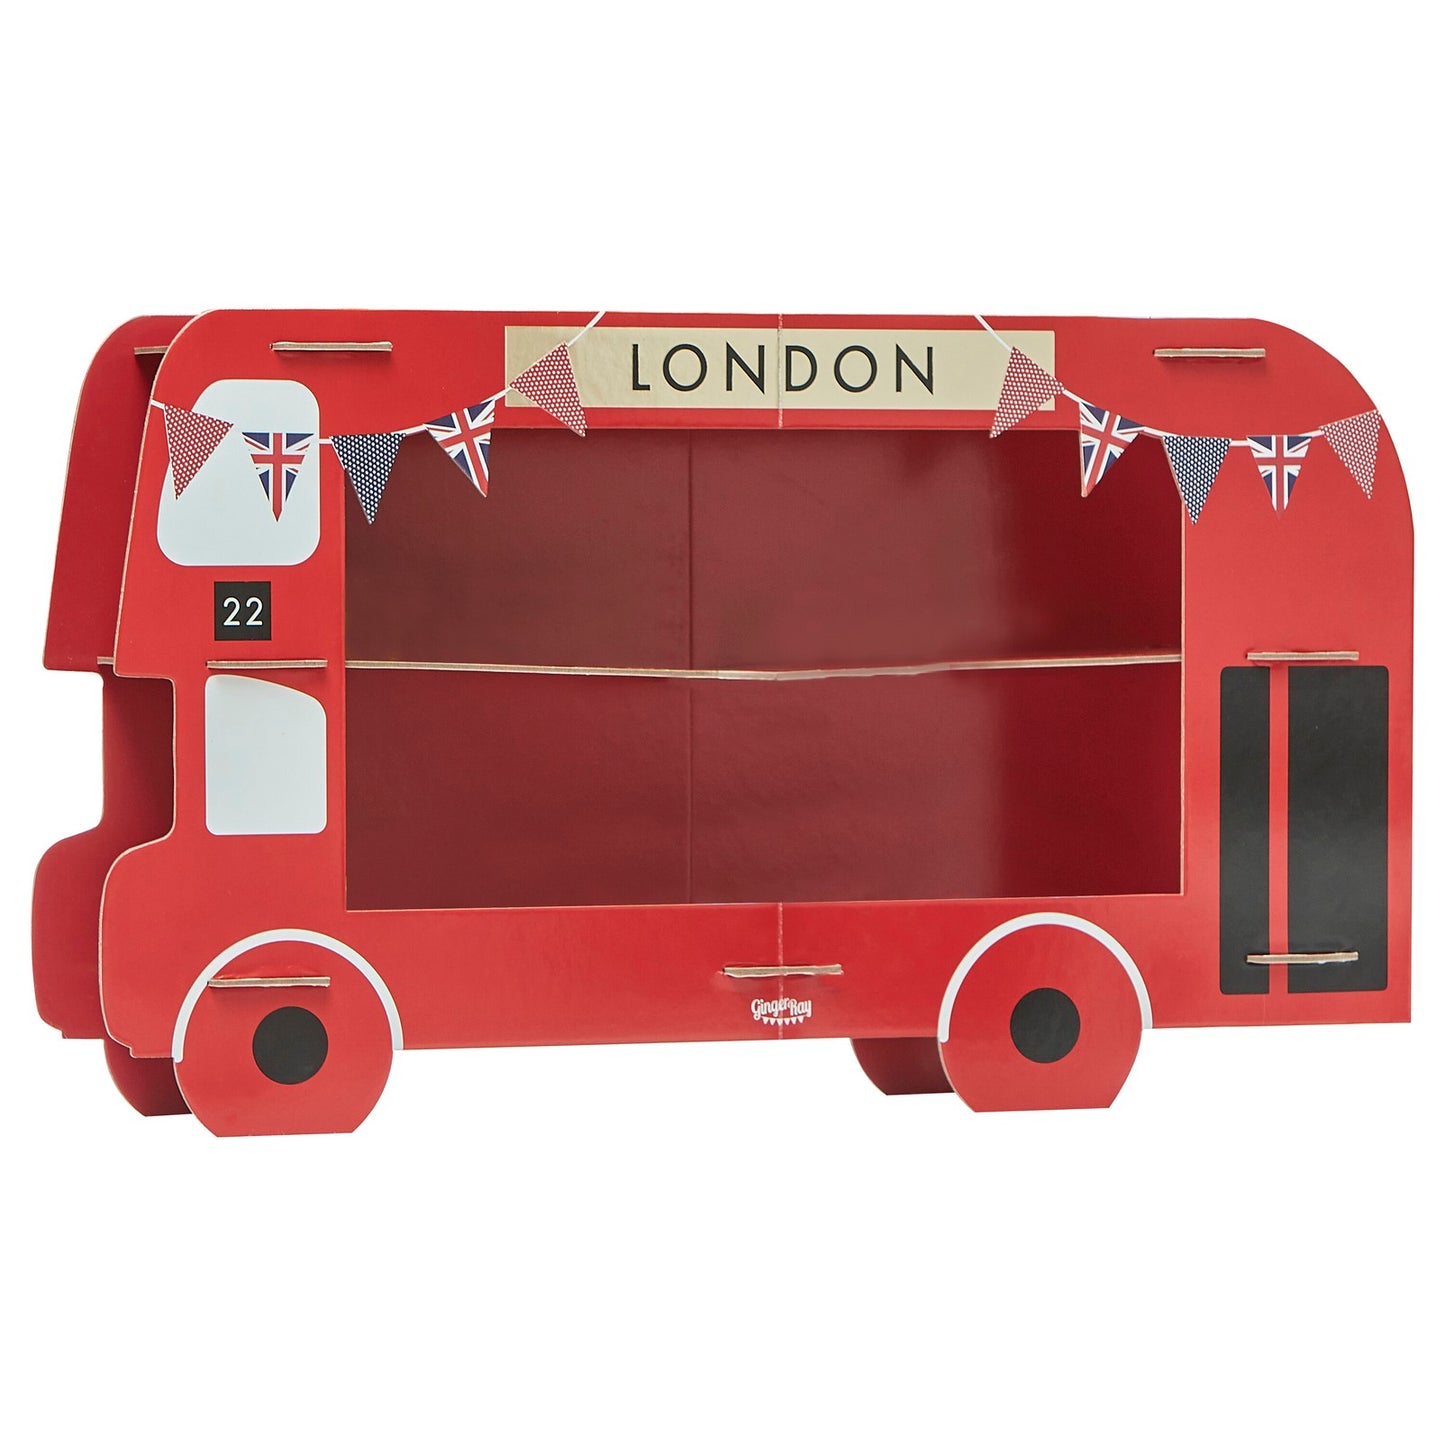 London Bus Cupcake and Sandwich Stand